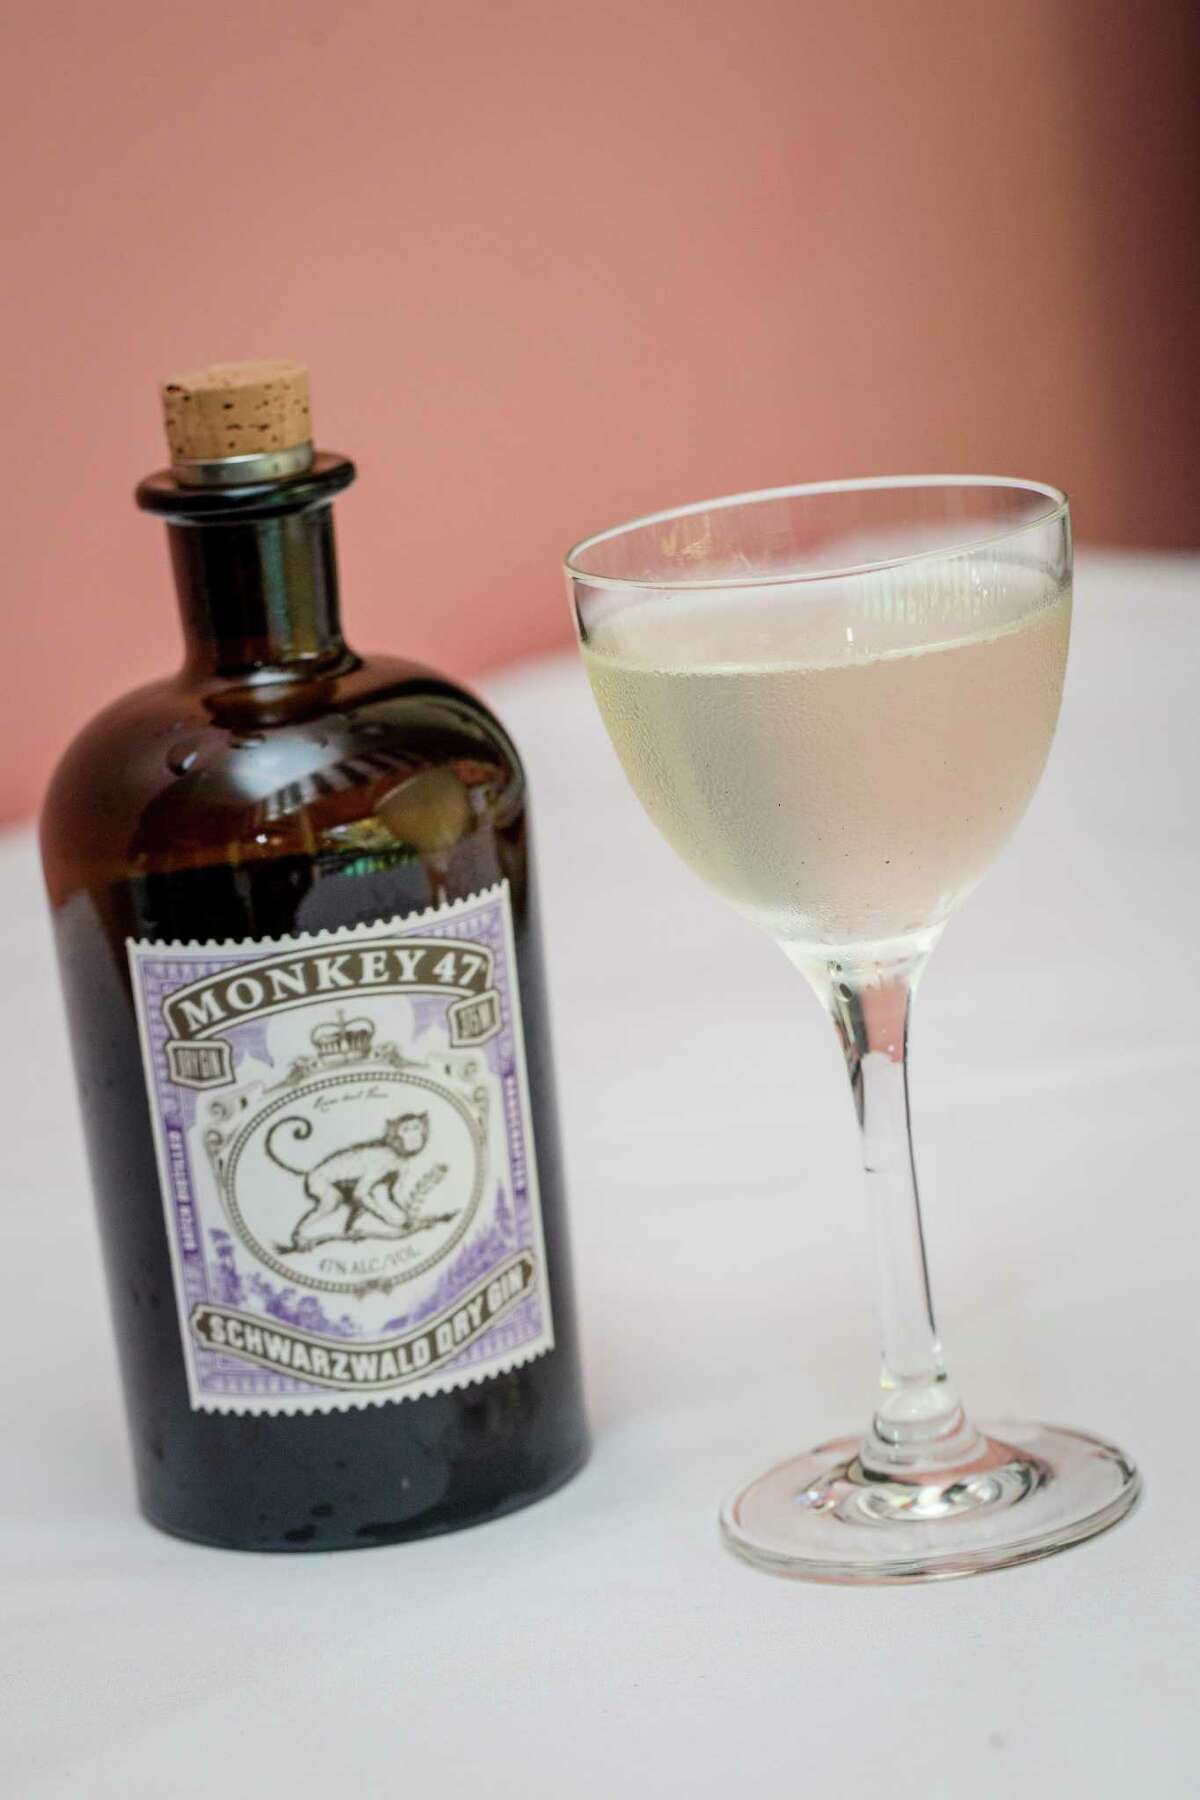 Wickets and Tea is a cocktail made with Monkey 47 Gin and white tea-infused blanc vermouth. It was served at 2015 Tales of the Cocktail in New Orleans.